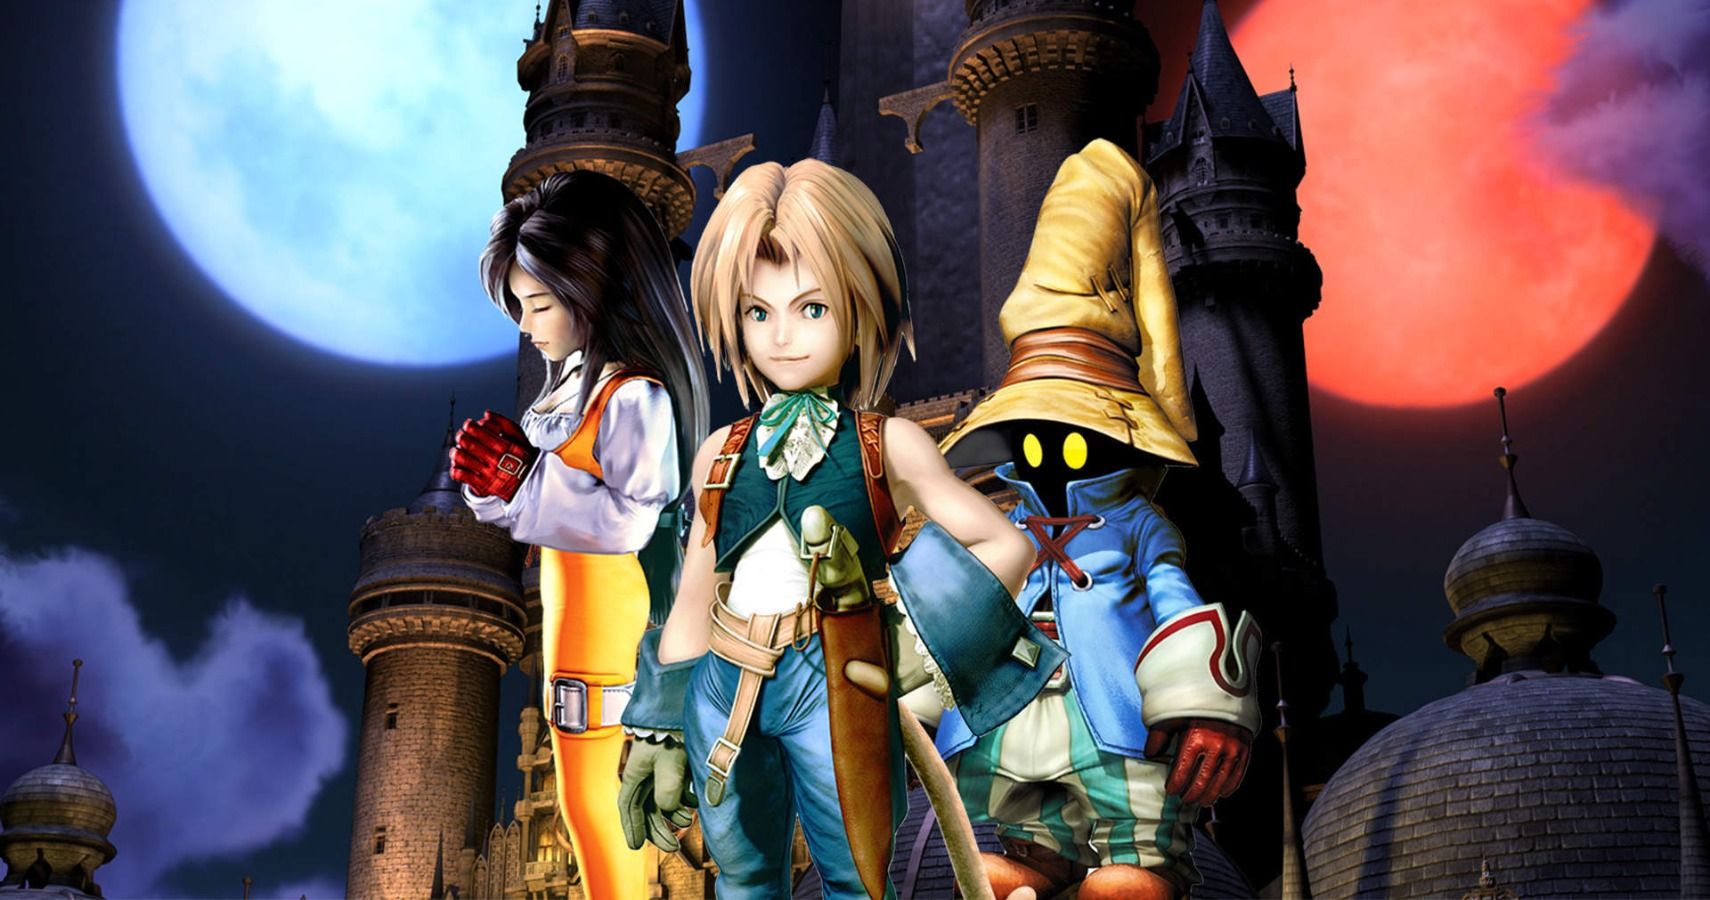 Final Fantasy 9 Every Playable Character S Ultimate Weapon And How To Obtain Them